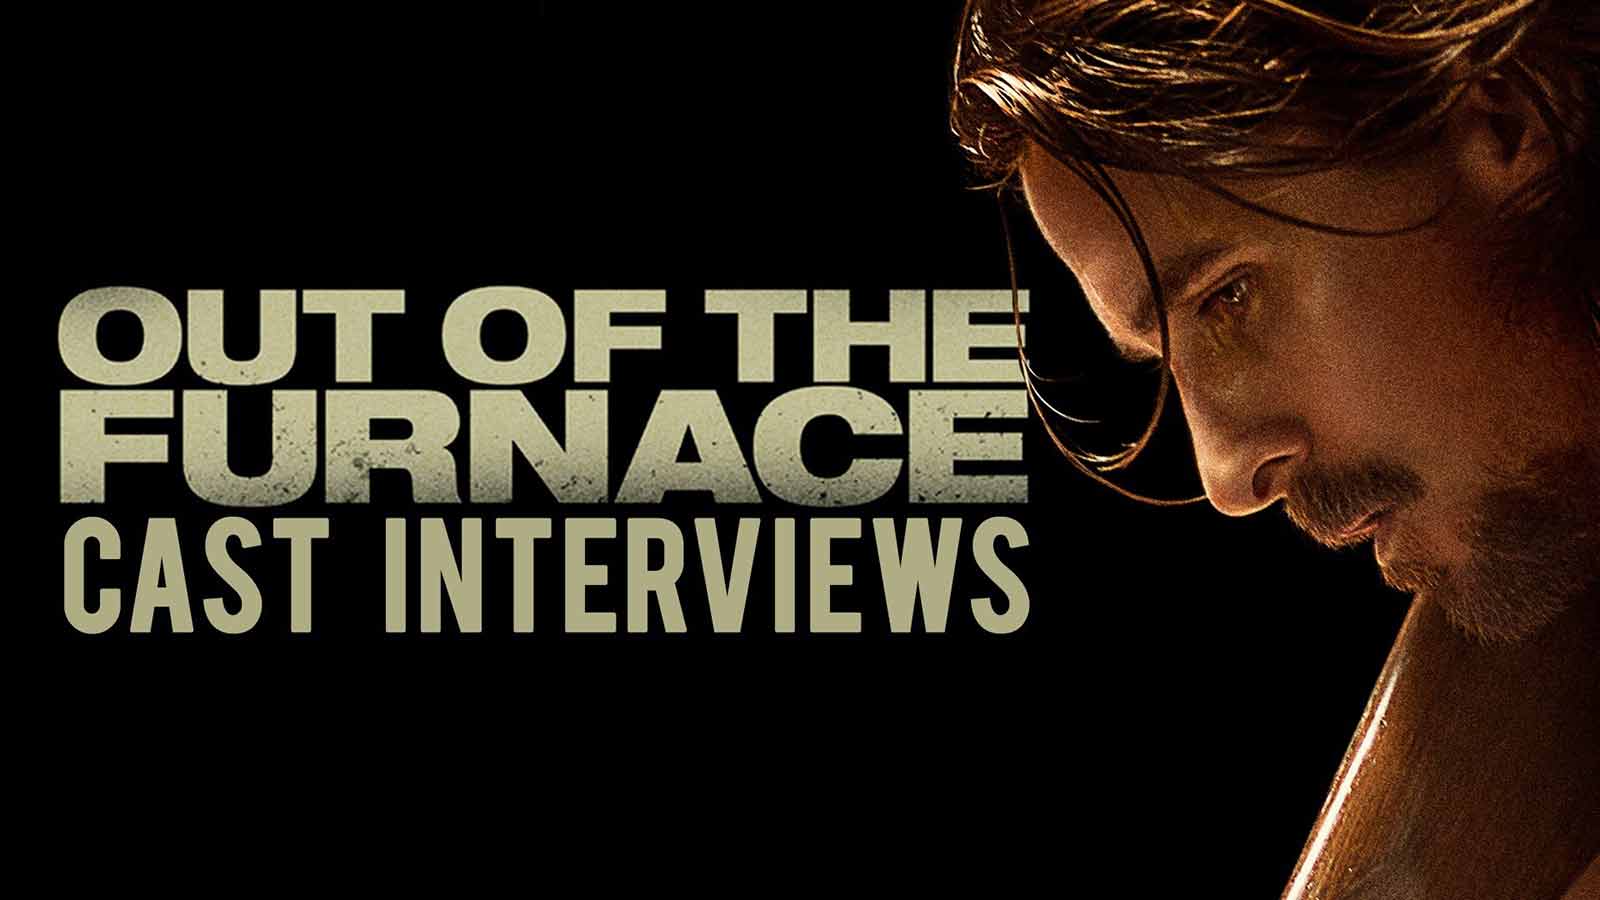 Out of the furnace (2013)